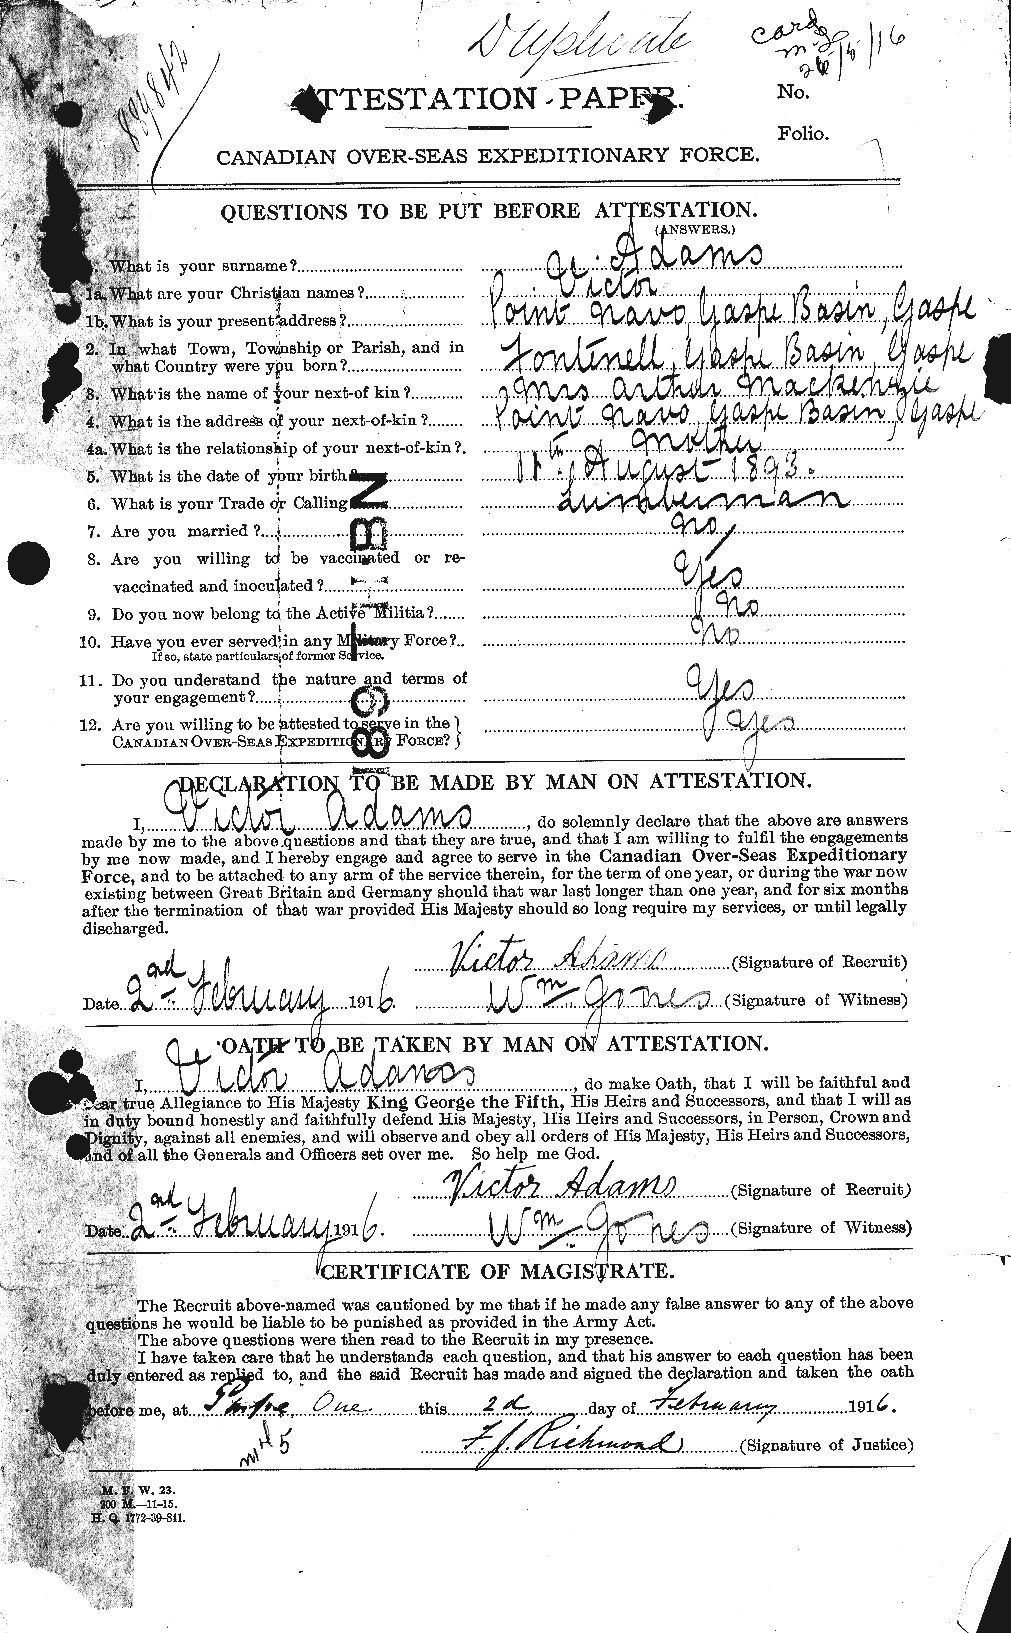 Personnel Records of the First World War - CEF 202184a